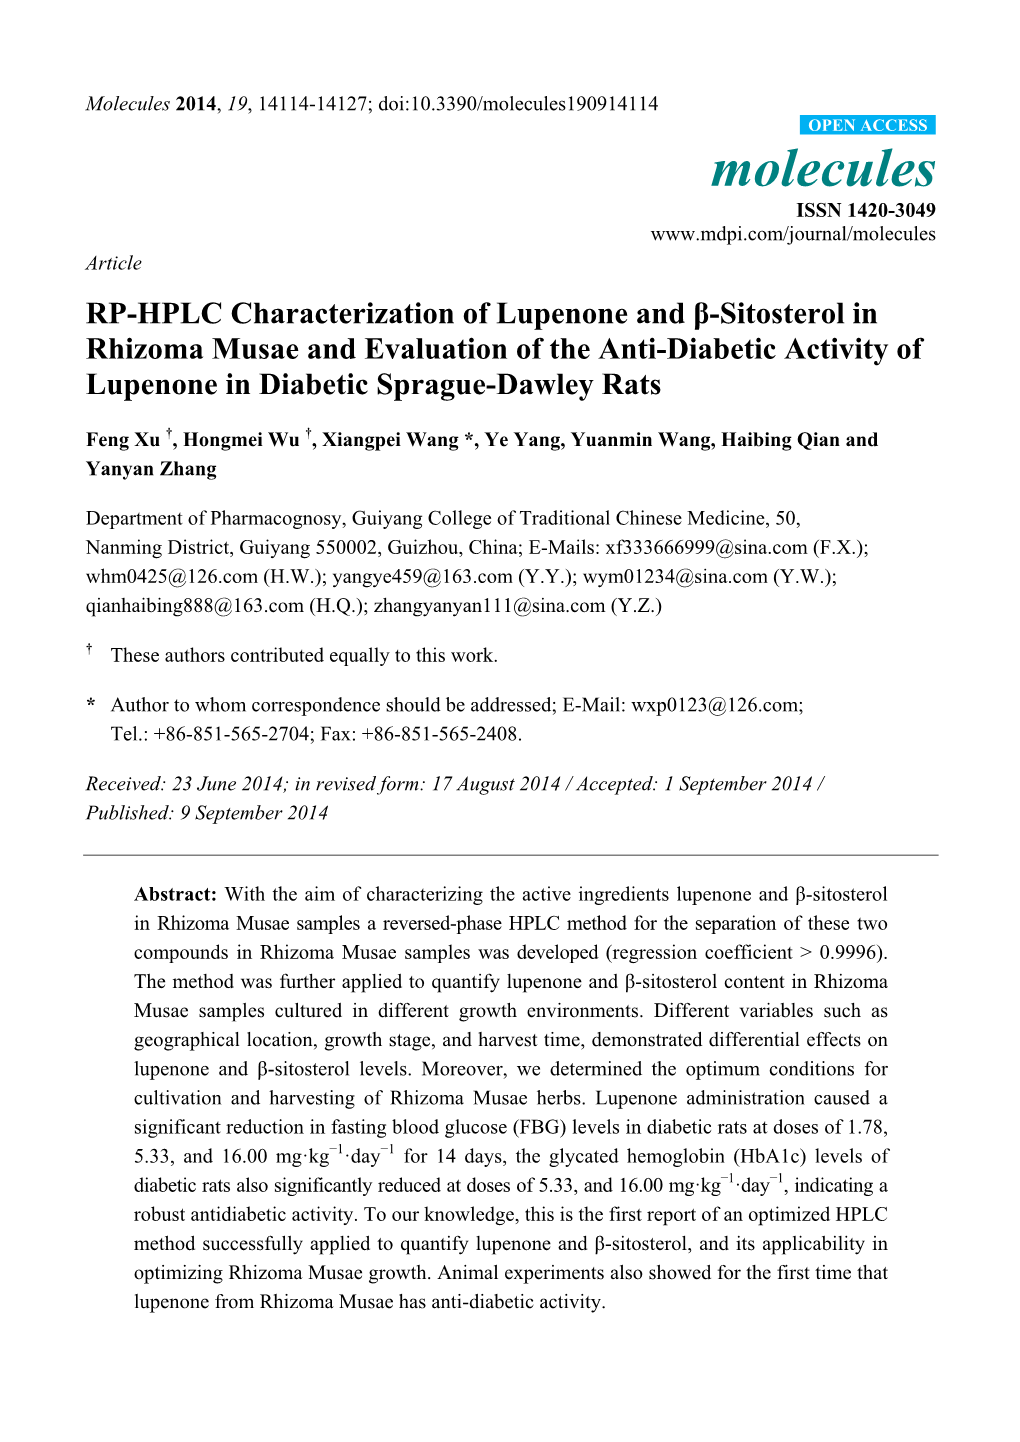 RP-HPLC Characterization of Lupenone and Β-Sitosterol in Rhizoma Musae and Evaluation of the Anti-Diabetic Activity of Lupenone in Diabetic Sprague-Dawley Rats